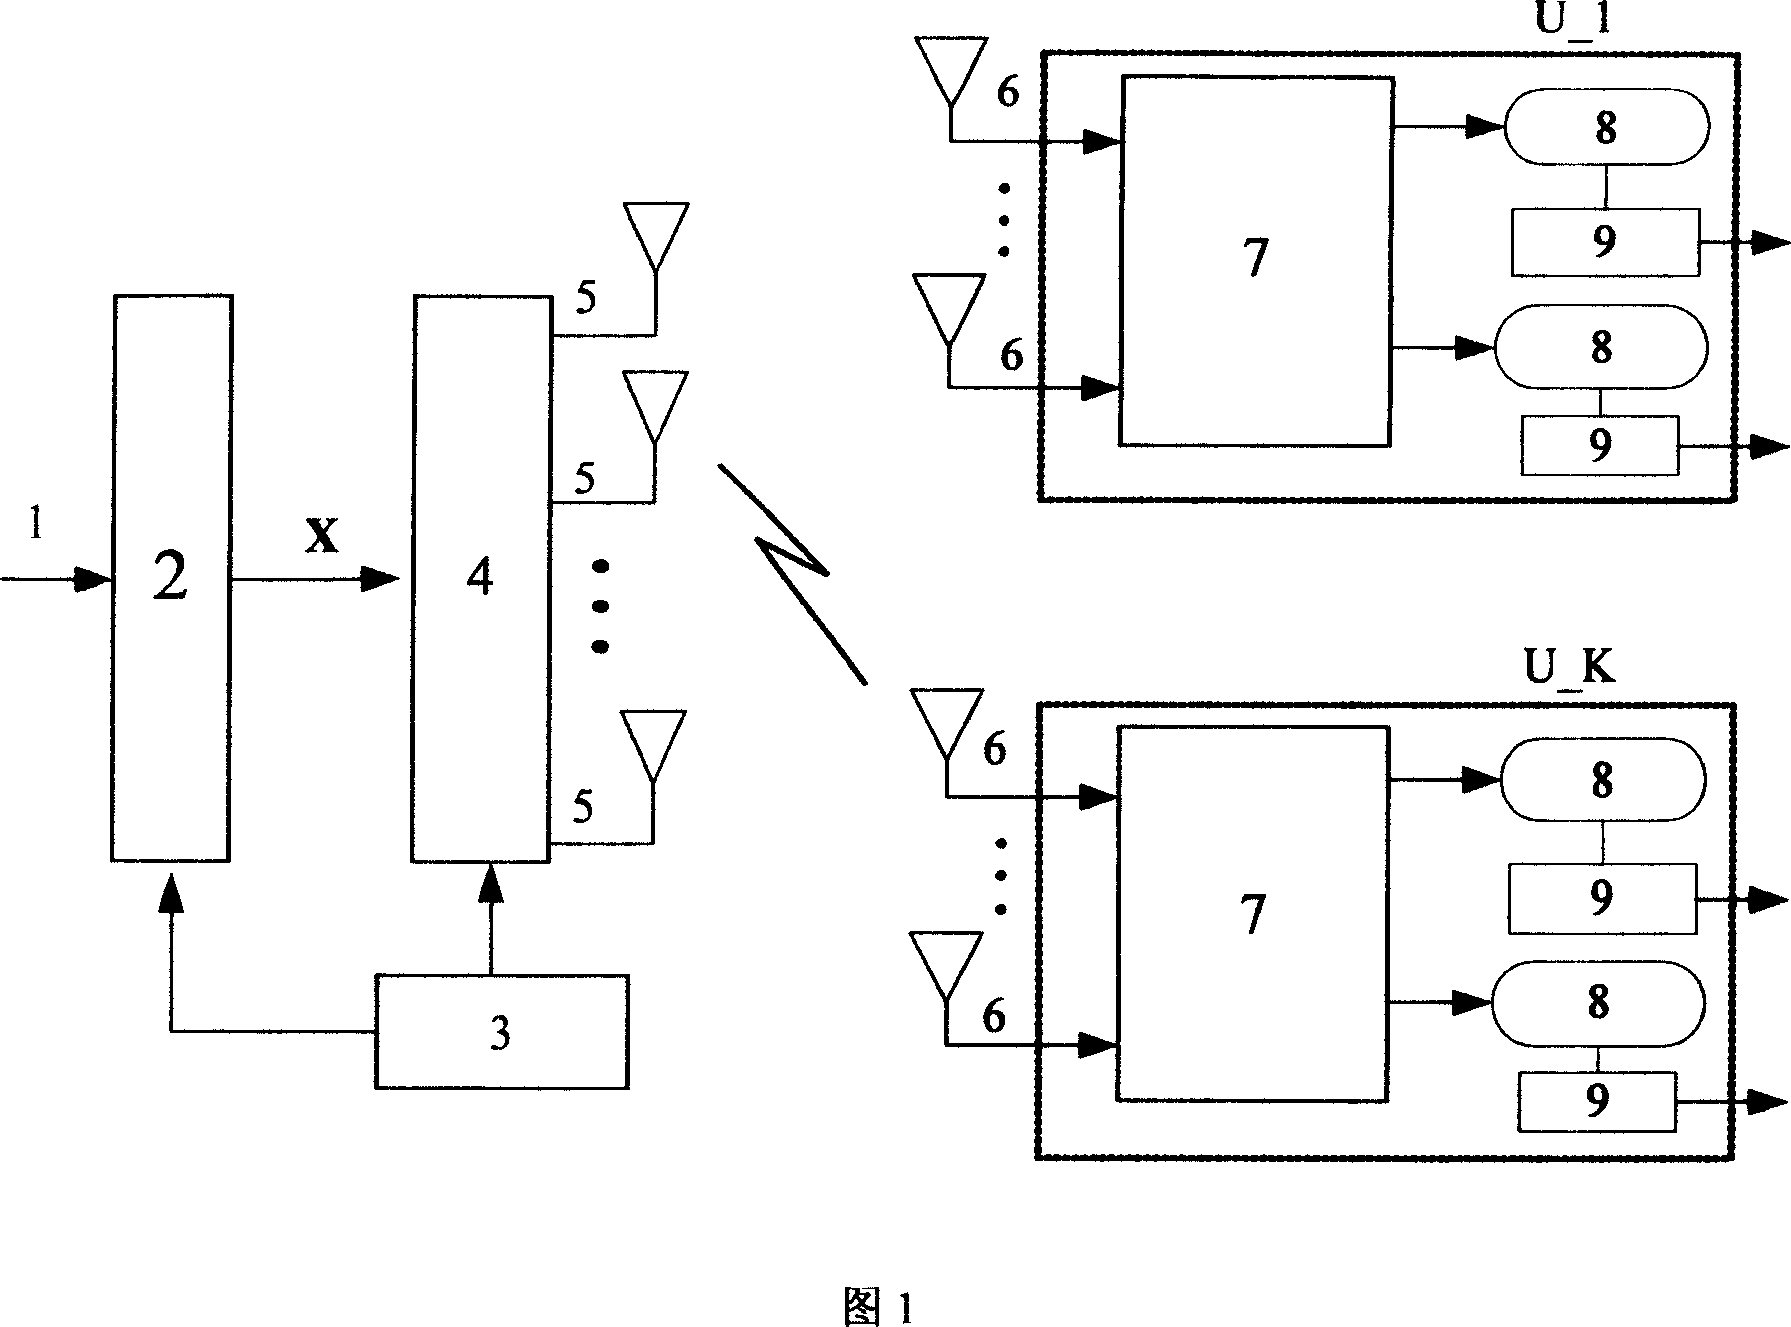 Downlink multi-user method combined with receiving antenna selection and close-to zero beam forming